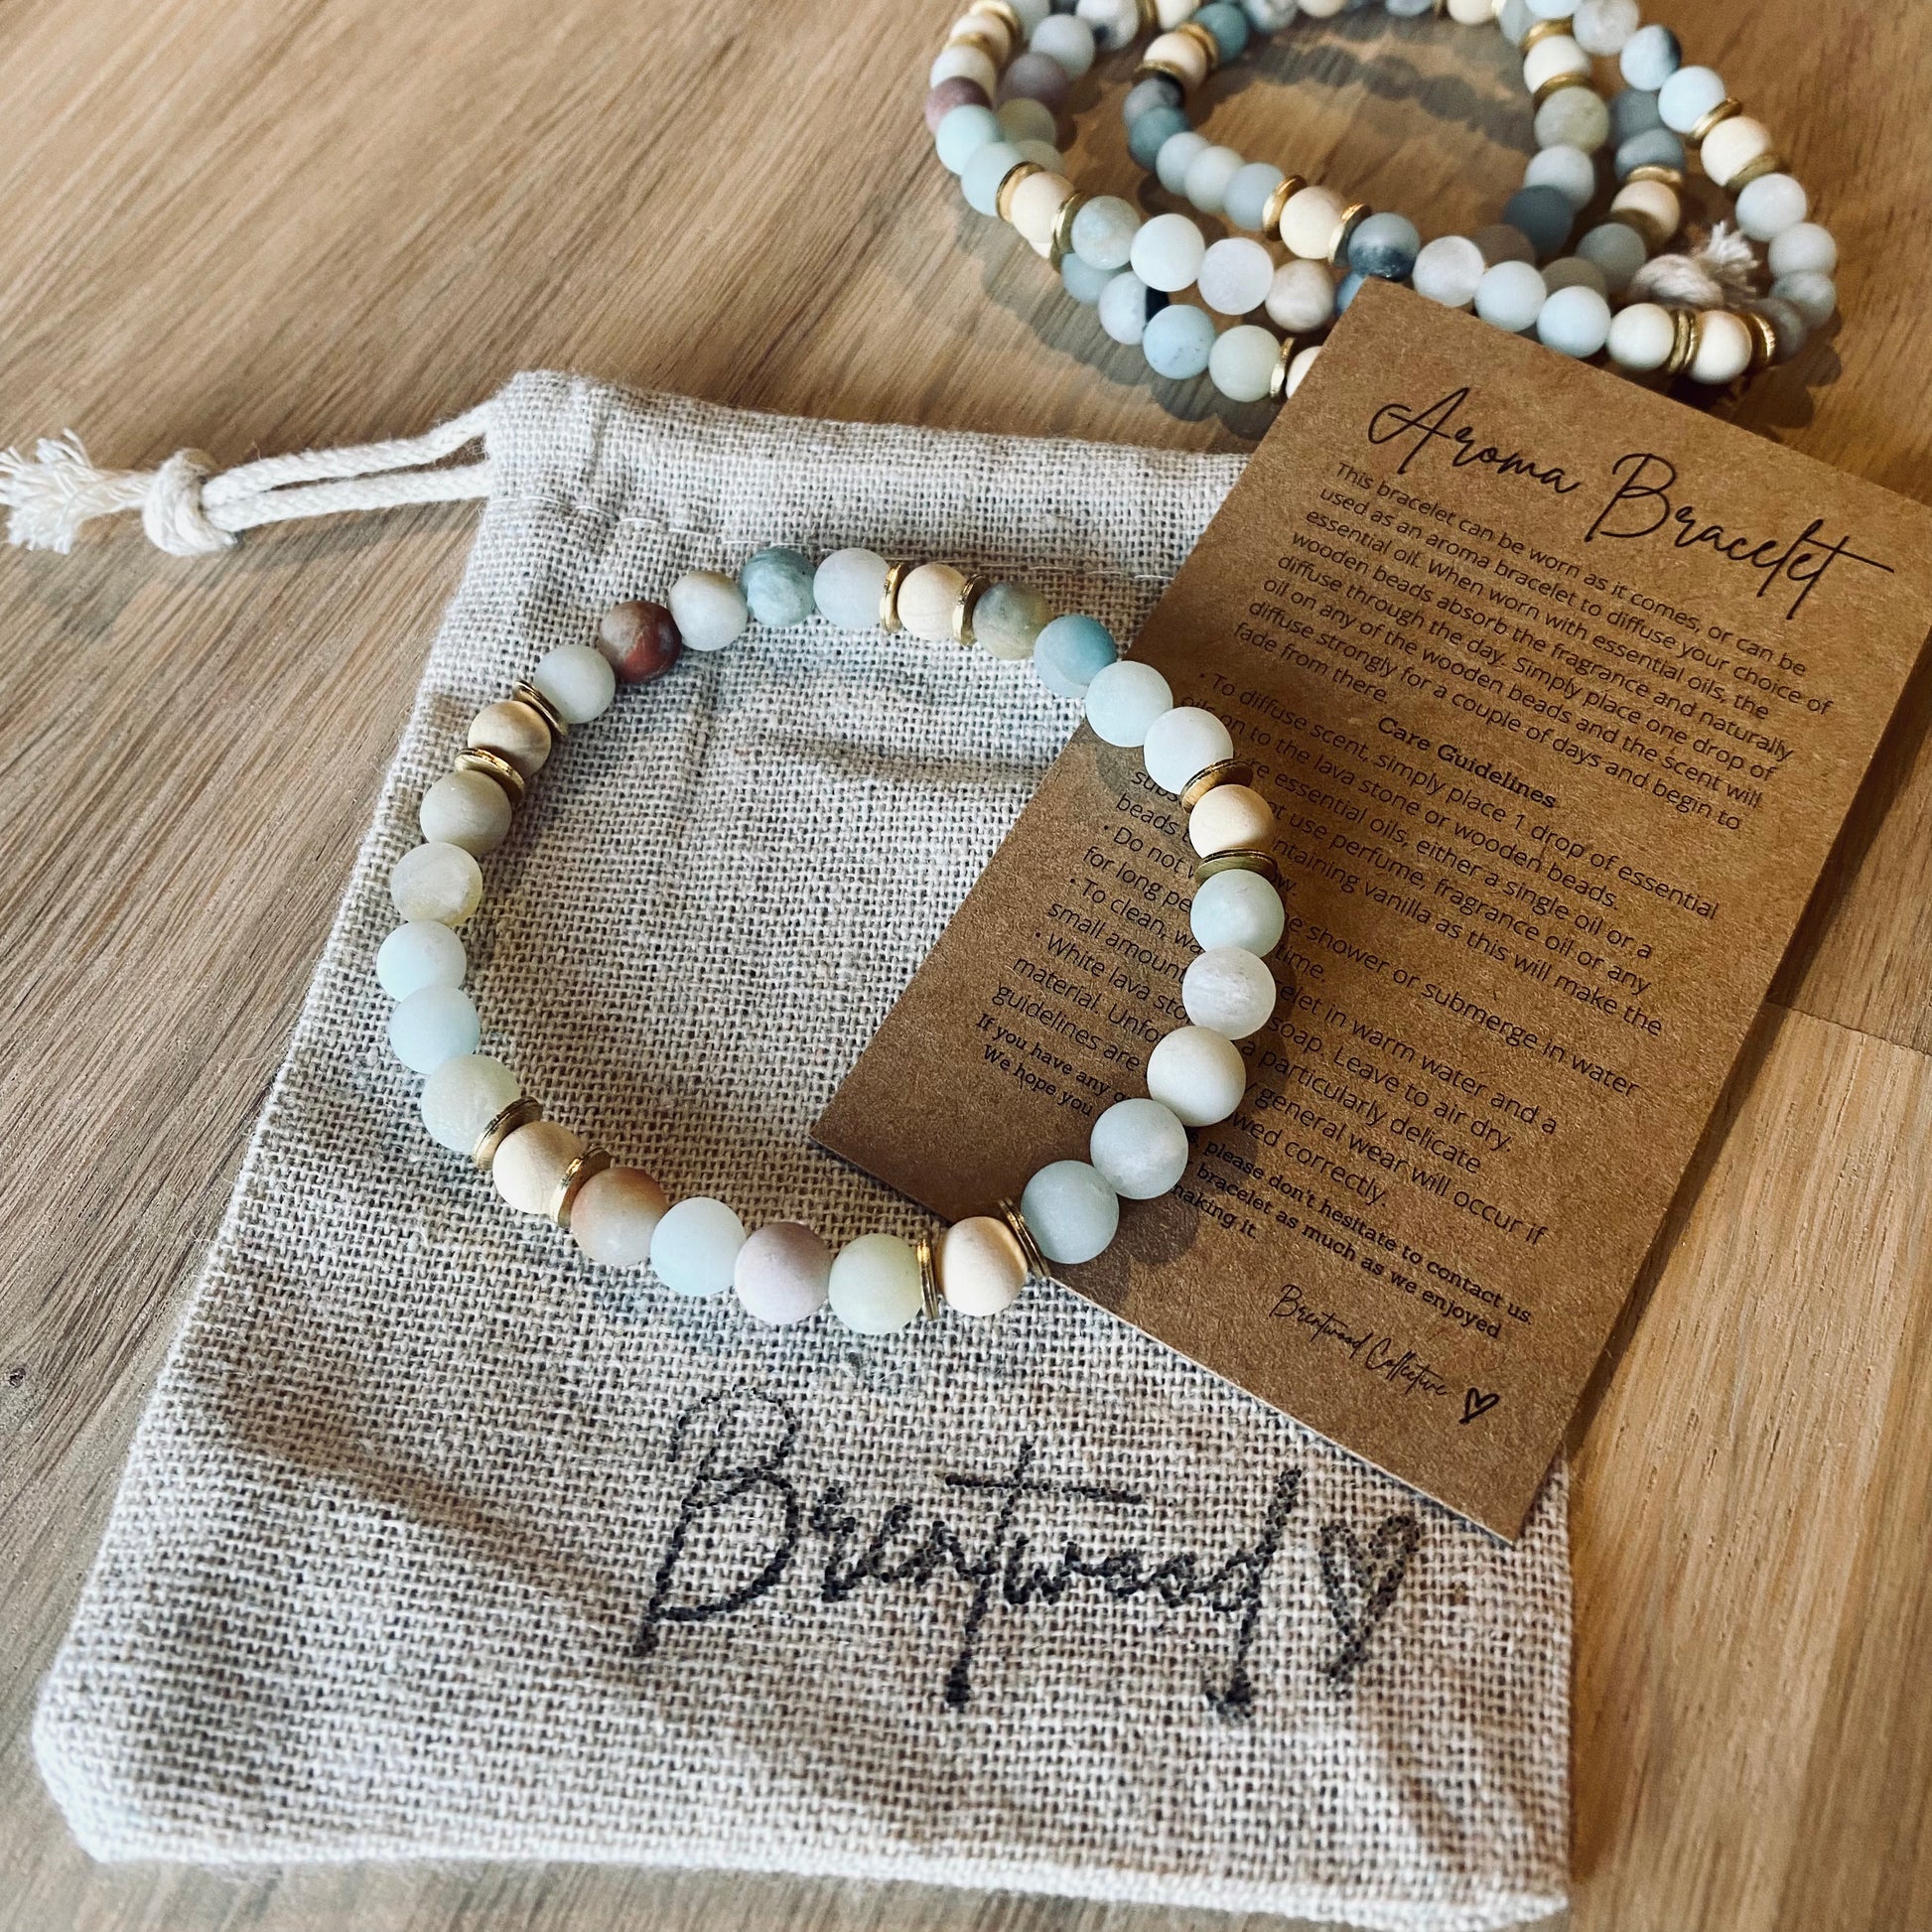 Amazonite aroma bracelet/diffuser bracelet made from 6mm amazonite & natural white wood beads with brass heishi disc embellishments. Laid on cloth pouch/drawstring bag stamped with “Brentwood” and an aroma bracelet information and care card on kraft brown card. 